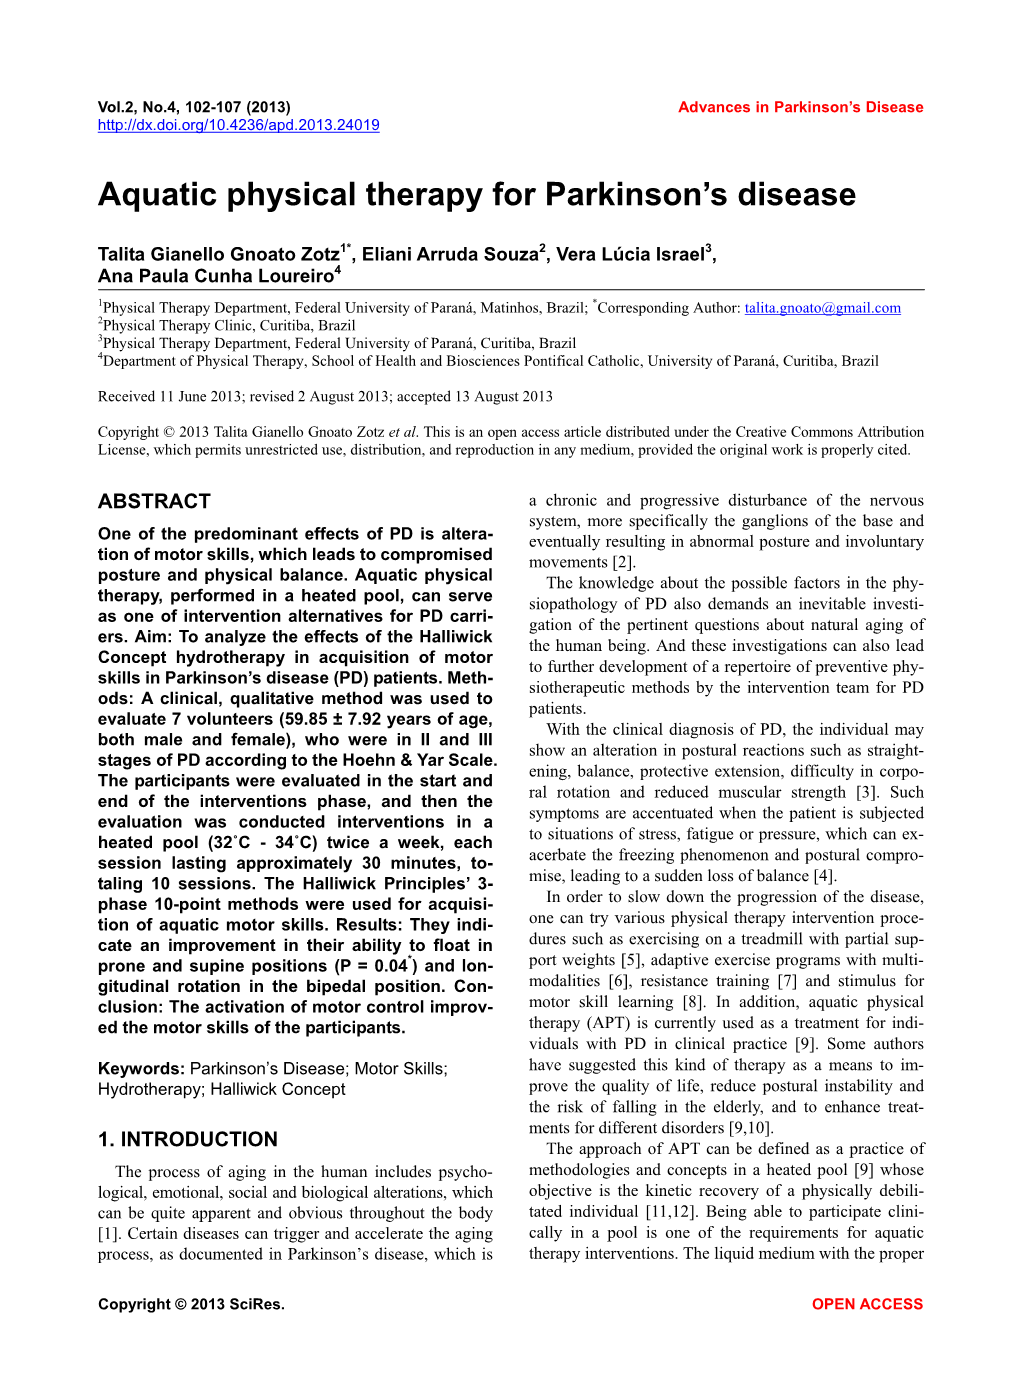 Aquatic Physical Therapy for Parkinson's Disease